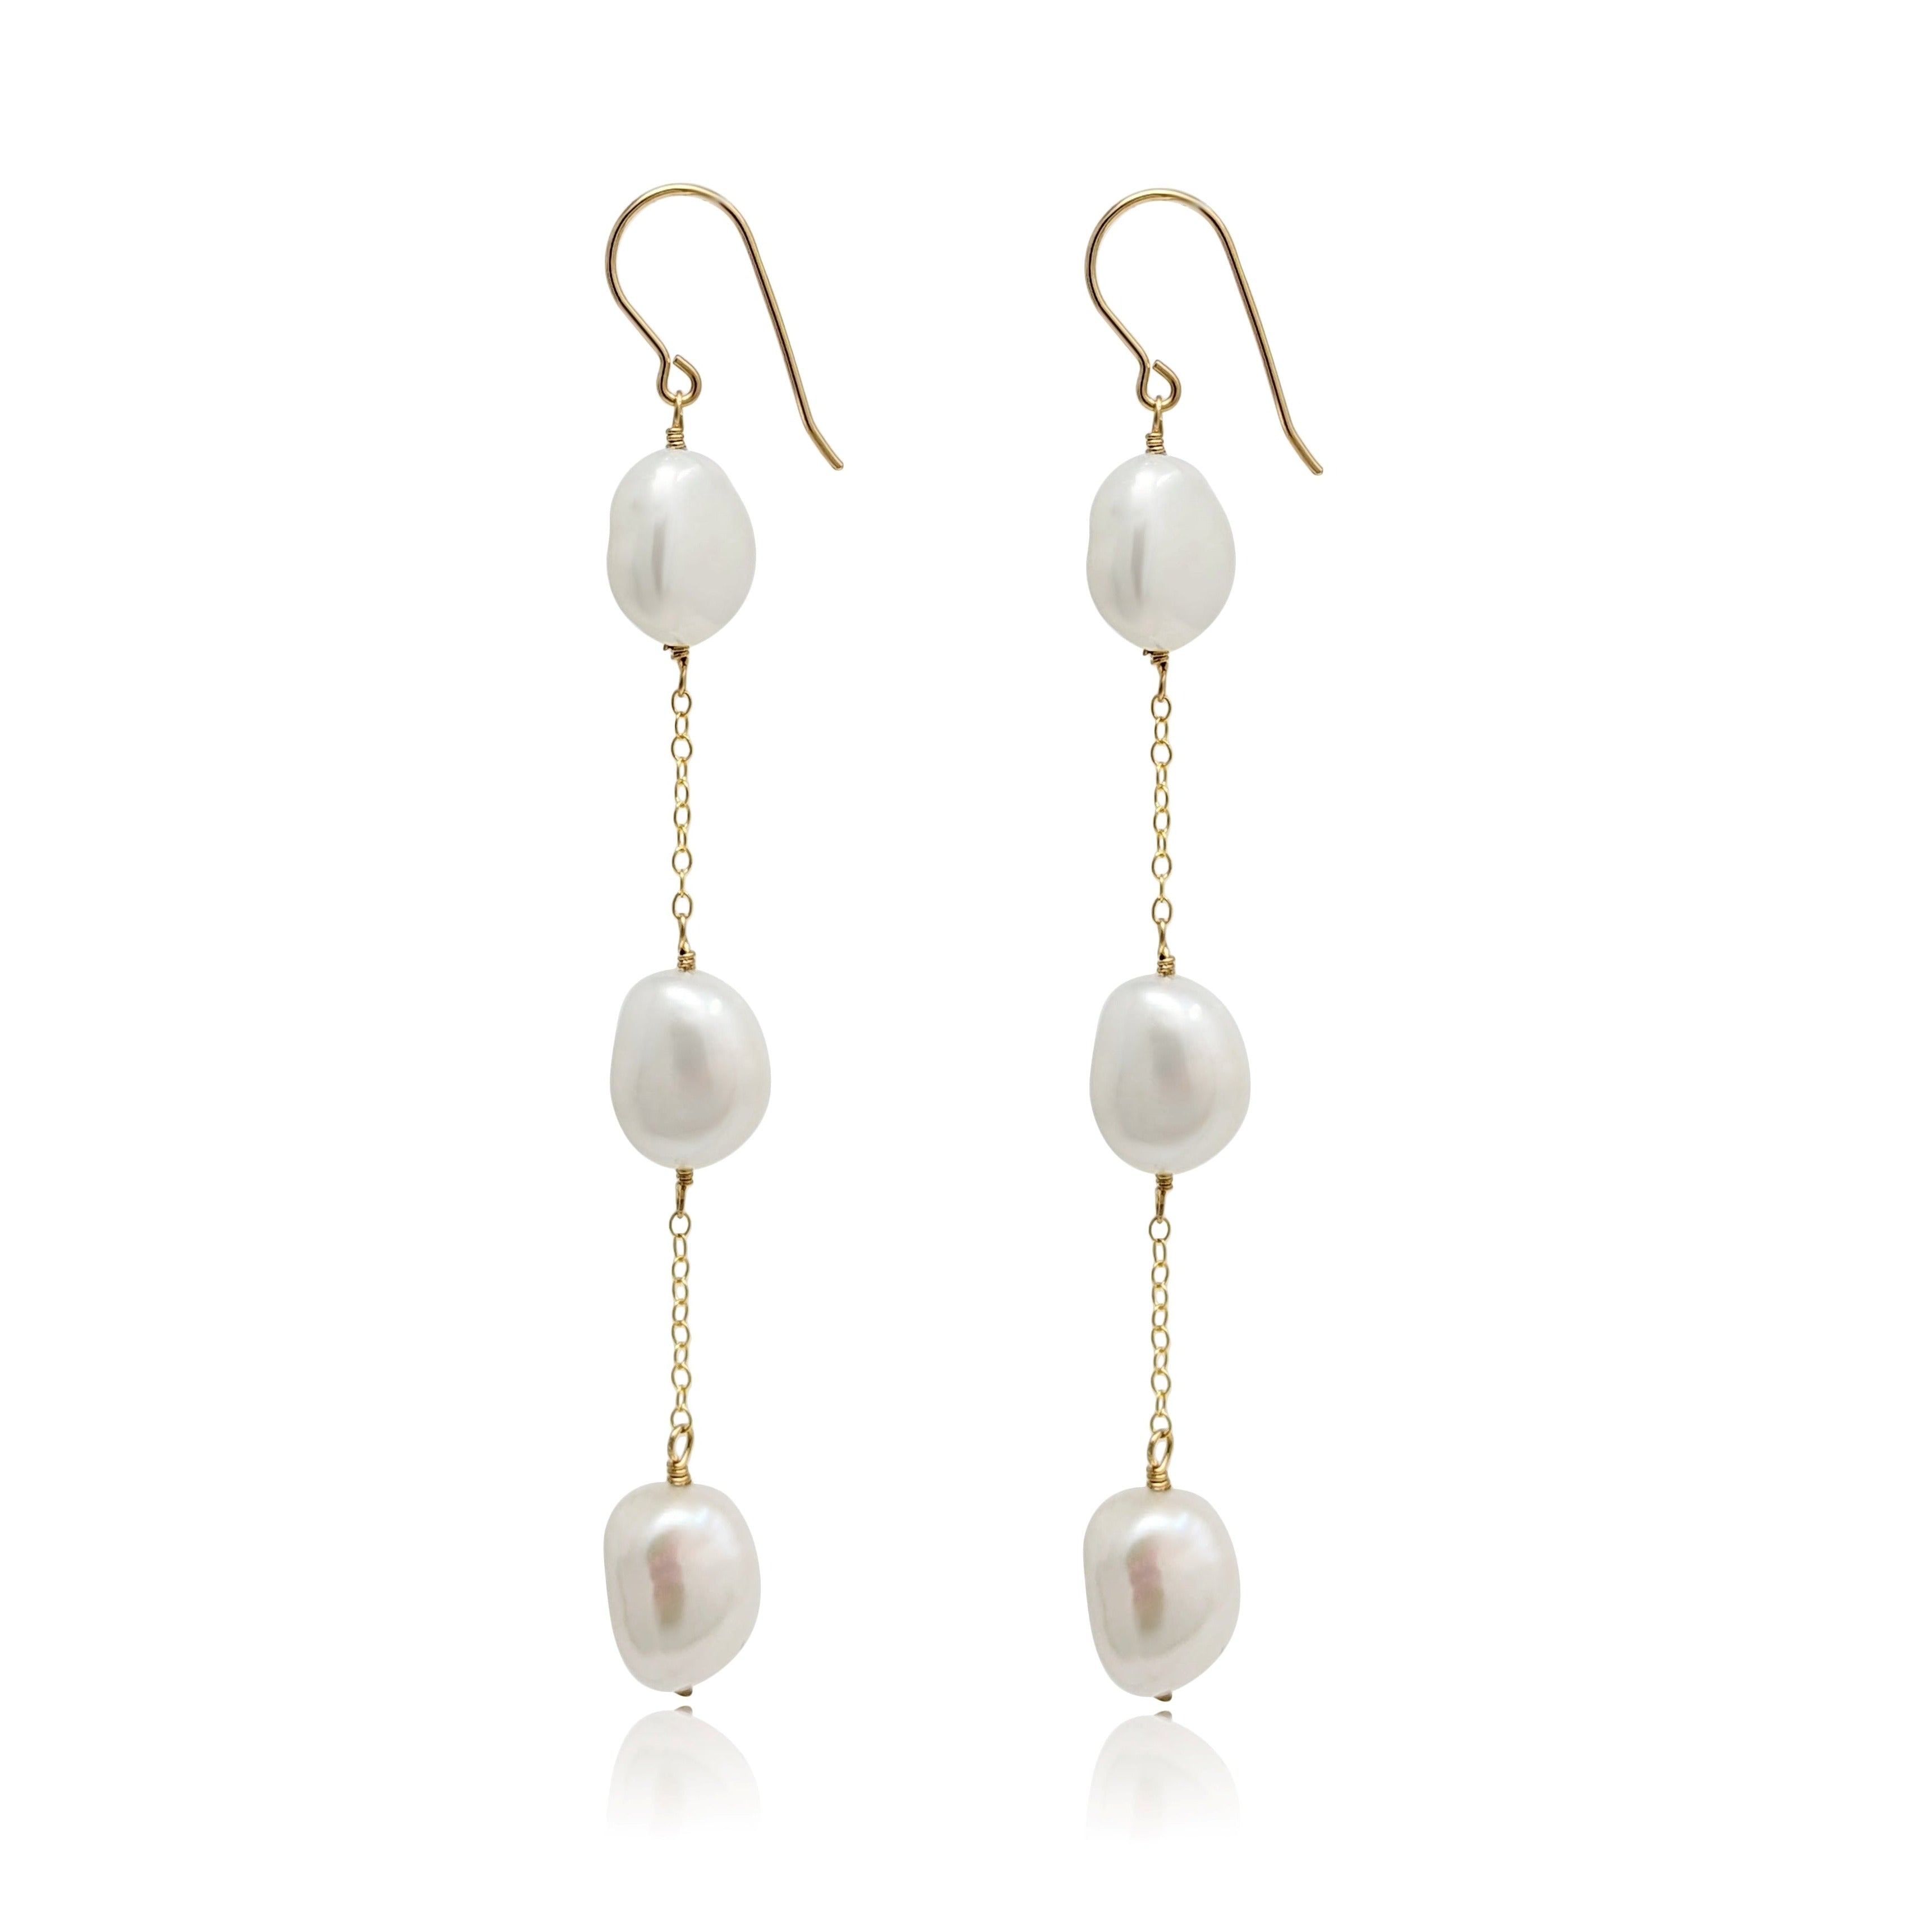 Long drop earrings with large trio of baroque pearls